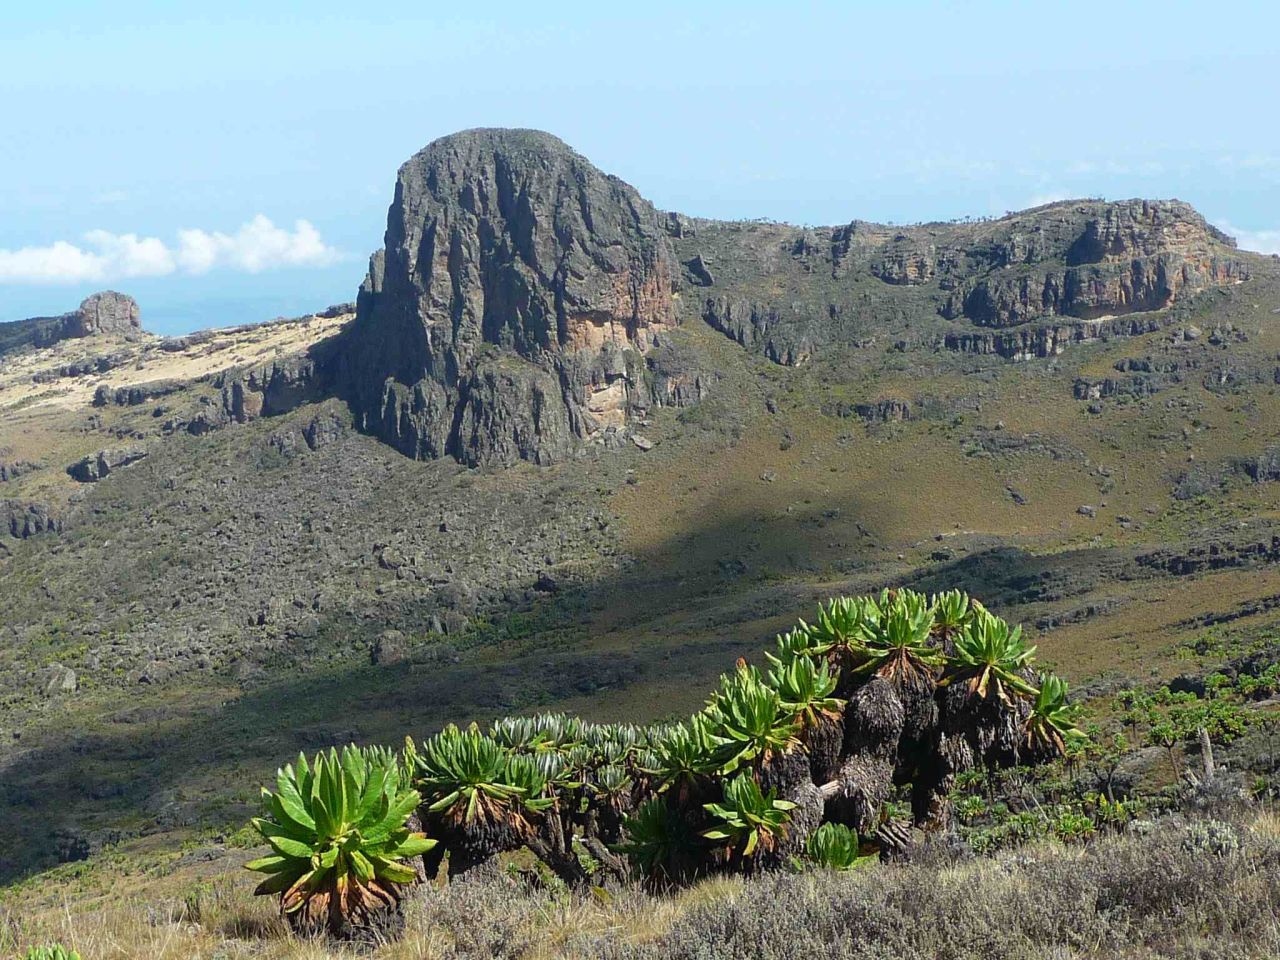 Rising along the Ugandan-Kenyan border, Mount Elgon is an extinct volcano ideal for extended hikes and bird watching. The best times to come here are from June to August and December to March. <em>Peak: 4,321 meters.</em>